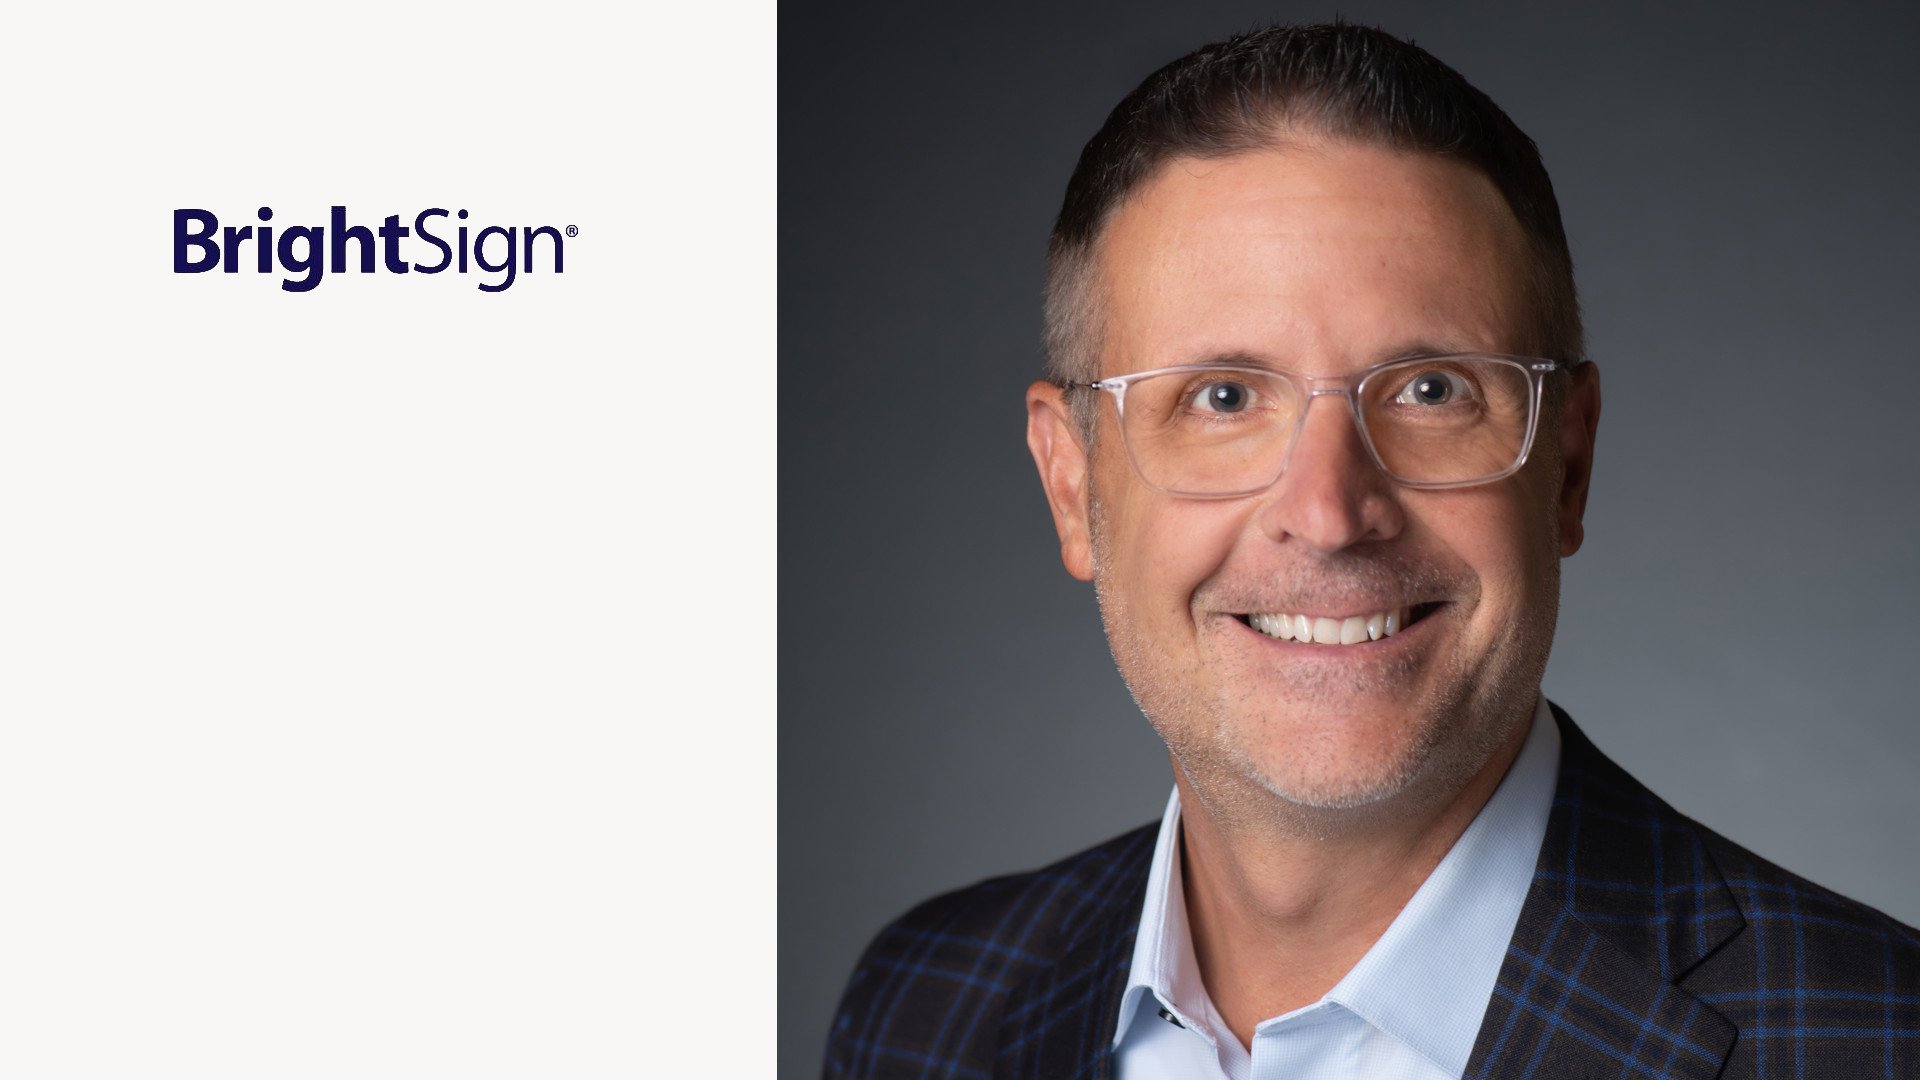 Steve Durkee, Co-CEO of Brightsign (Photo: BrightSign)